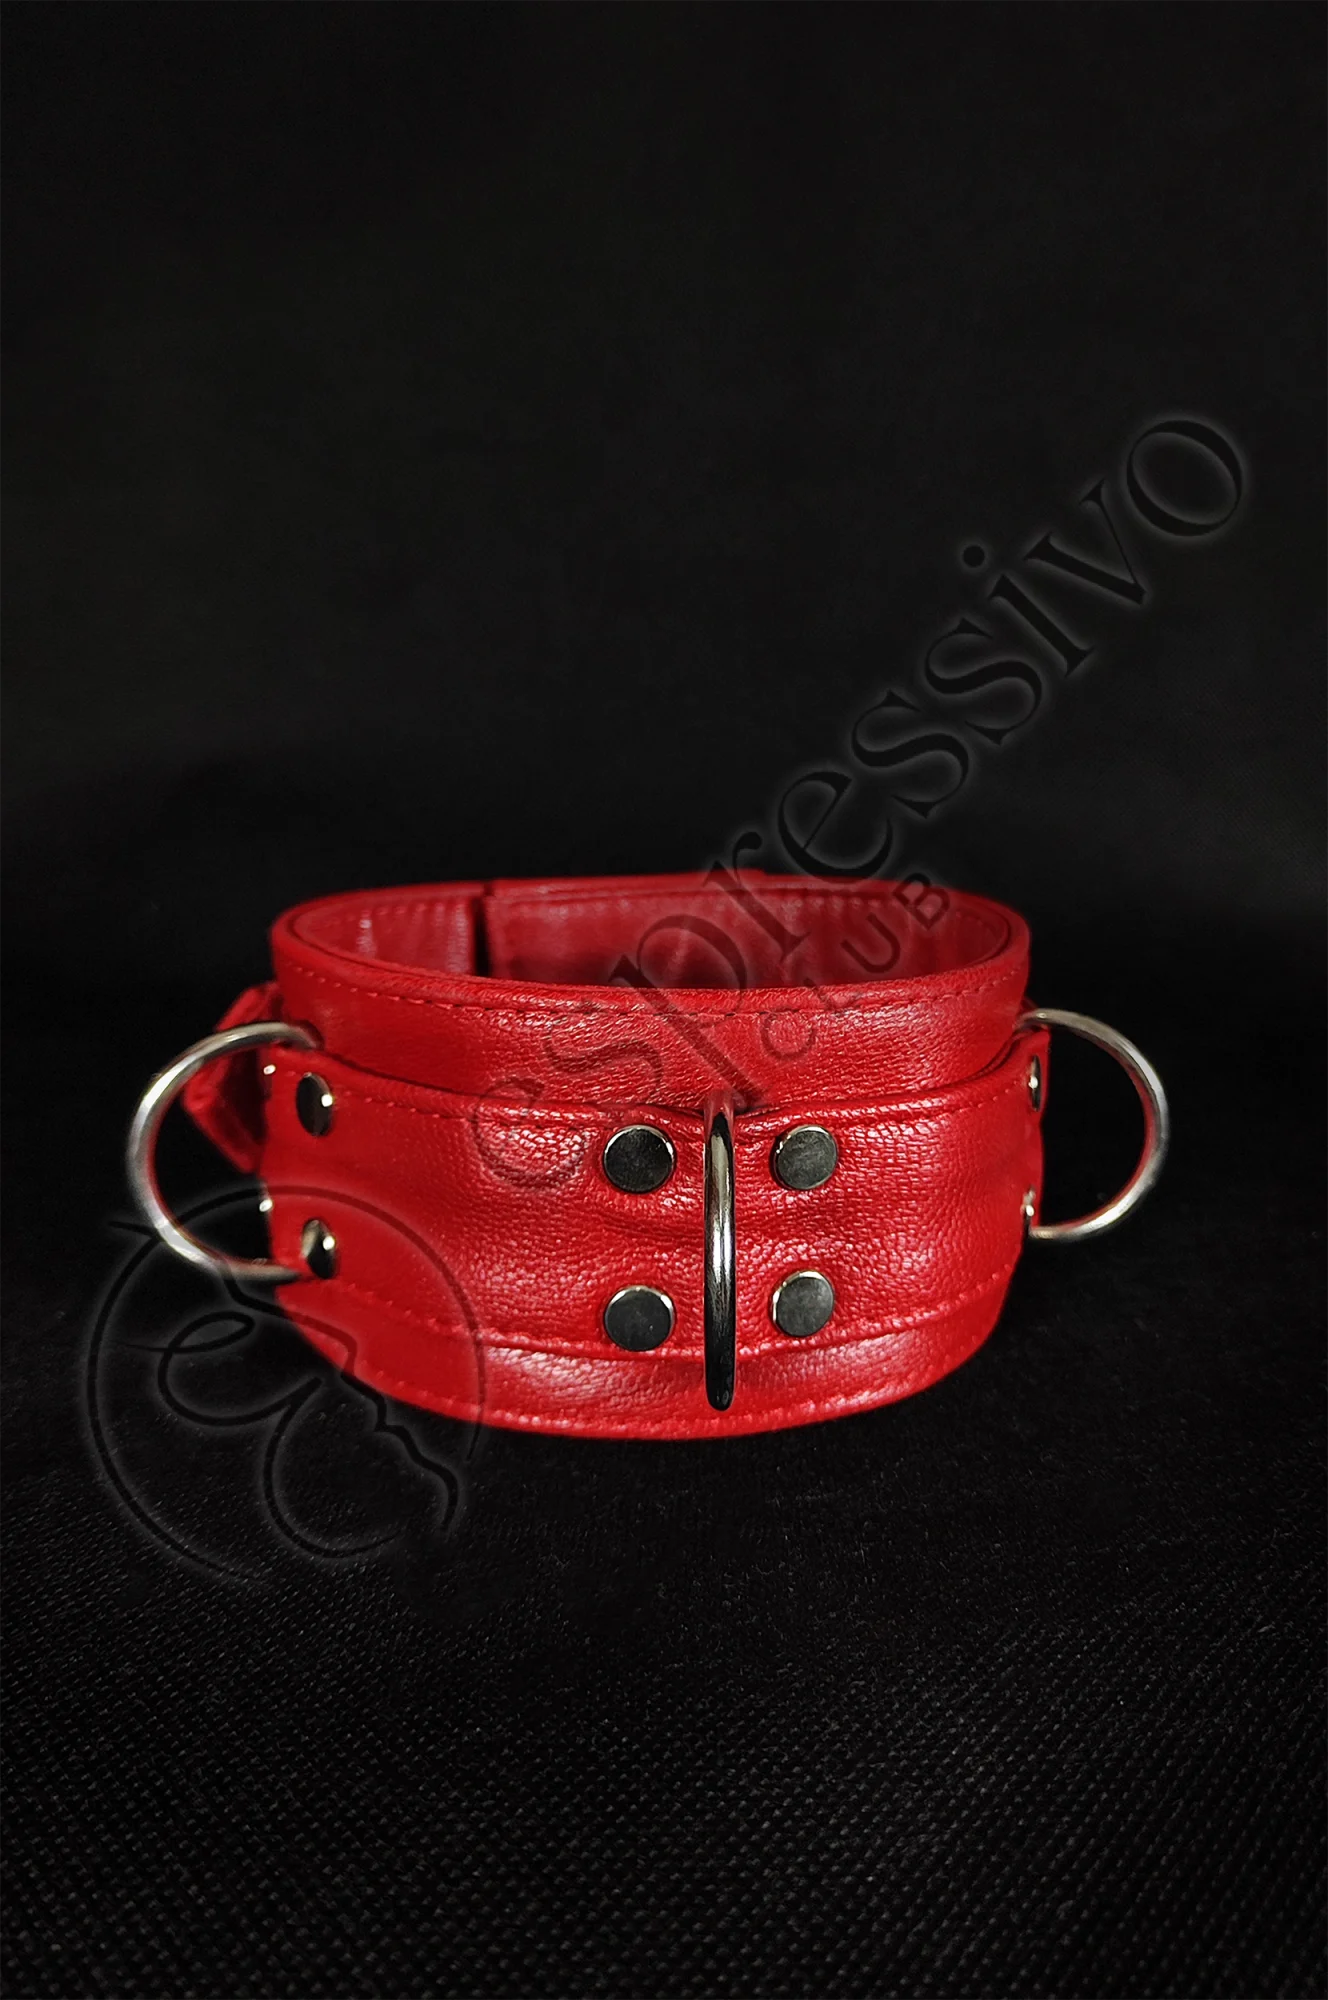 Red Leather Bondage Collar In - Limited Edition Collar